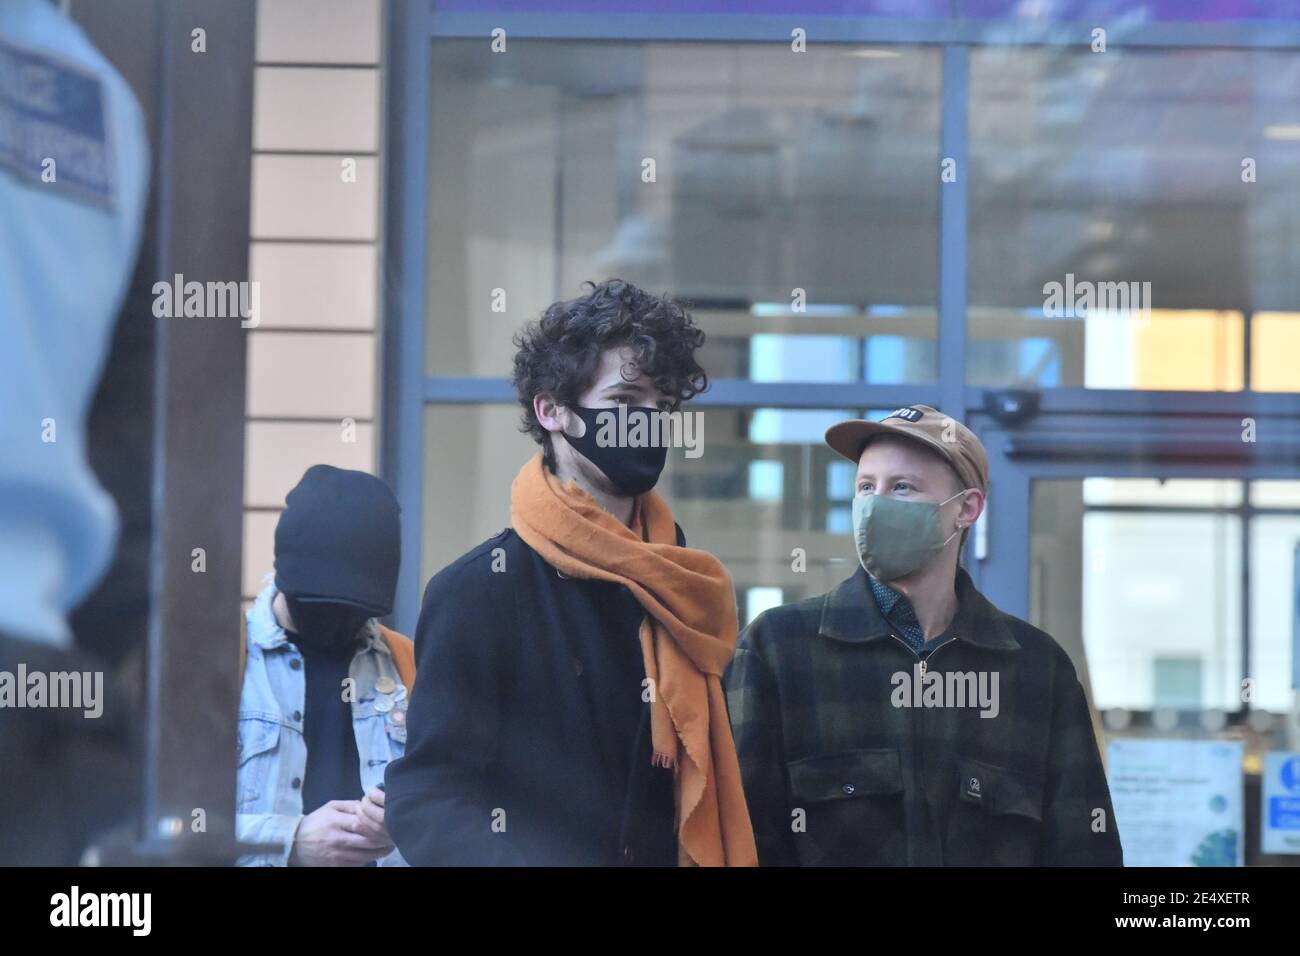 Sage Willoughby (left), 21, and Milo Ponsford, 25, arrive at Bristol Magistrates' Court where they are appearing charged with criminal damage over the toppling of the Edward Colston statue in Bristol during the Black Lives Matter protests in June last year. Picture date: Monday January 25, 2021. Stock Photo